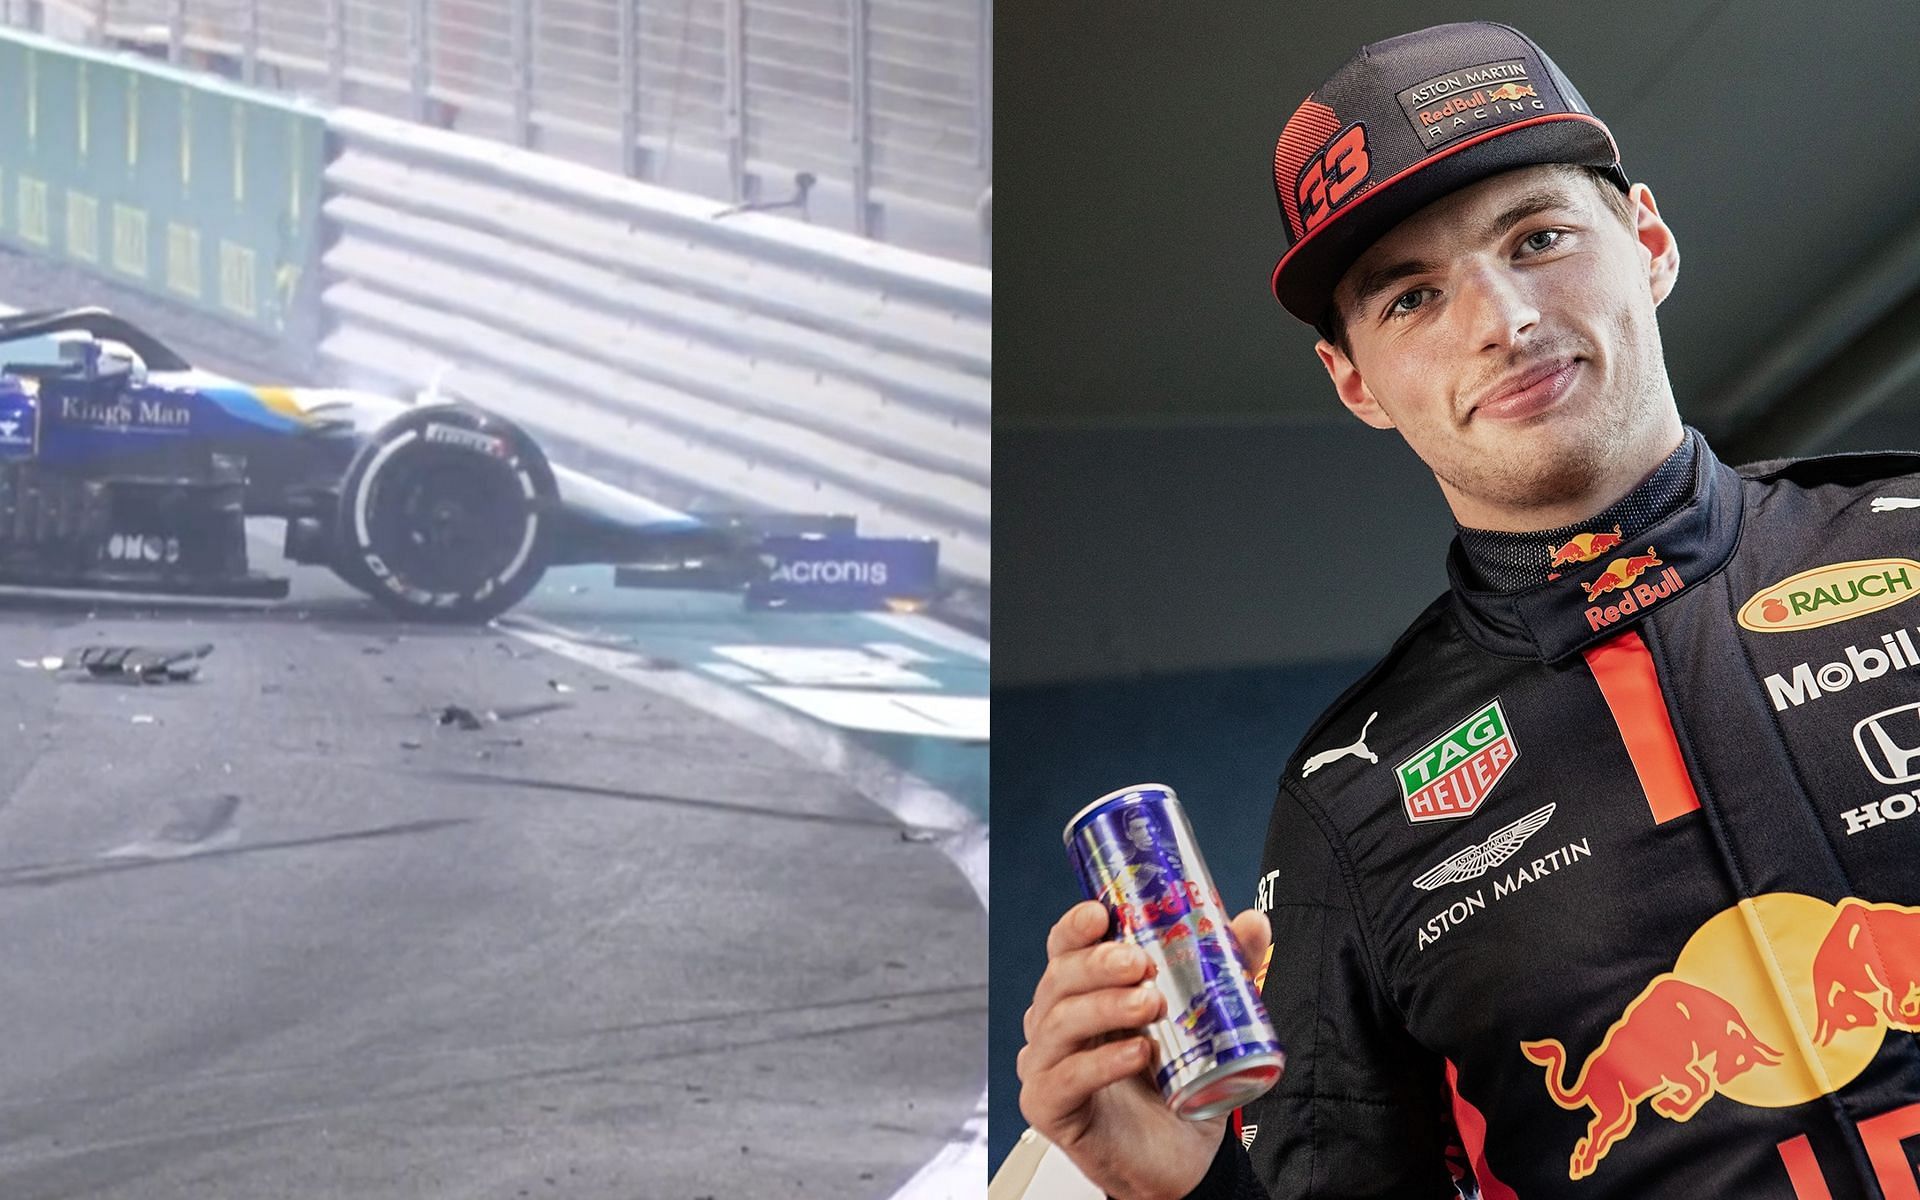 Nicholas Latifi (left) and Max Verstappen (right) (Image courtesy: @gbm_xii and @maxverstappen33 on Twitter)